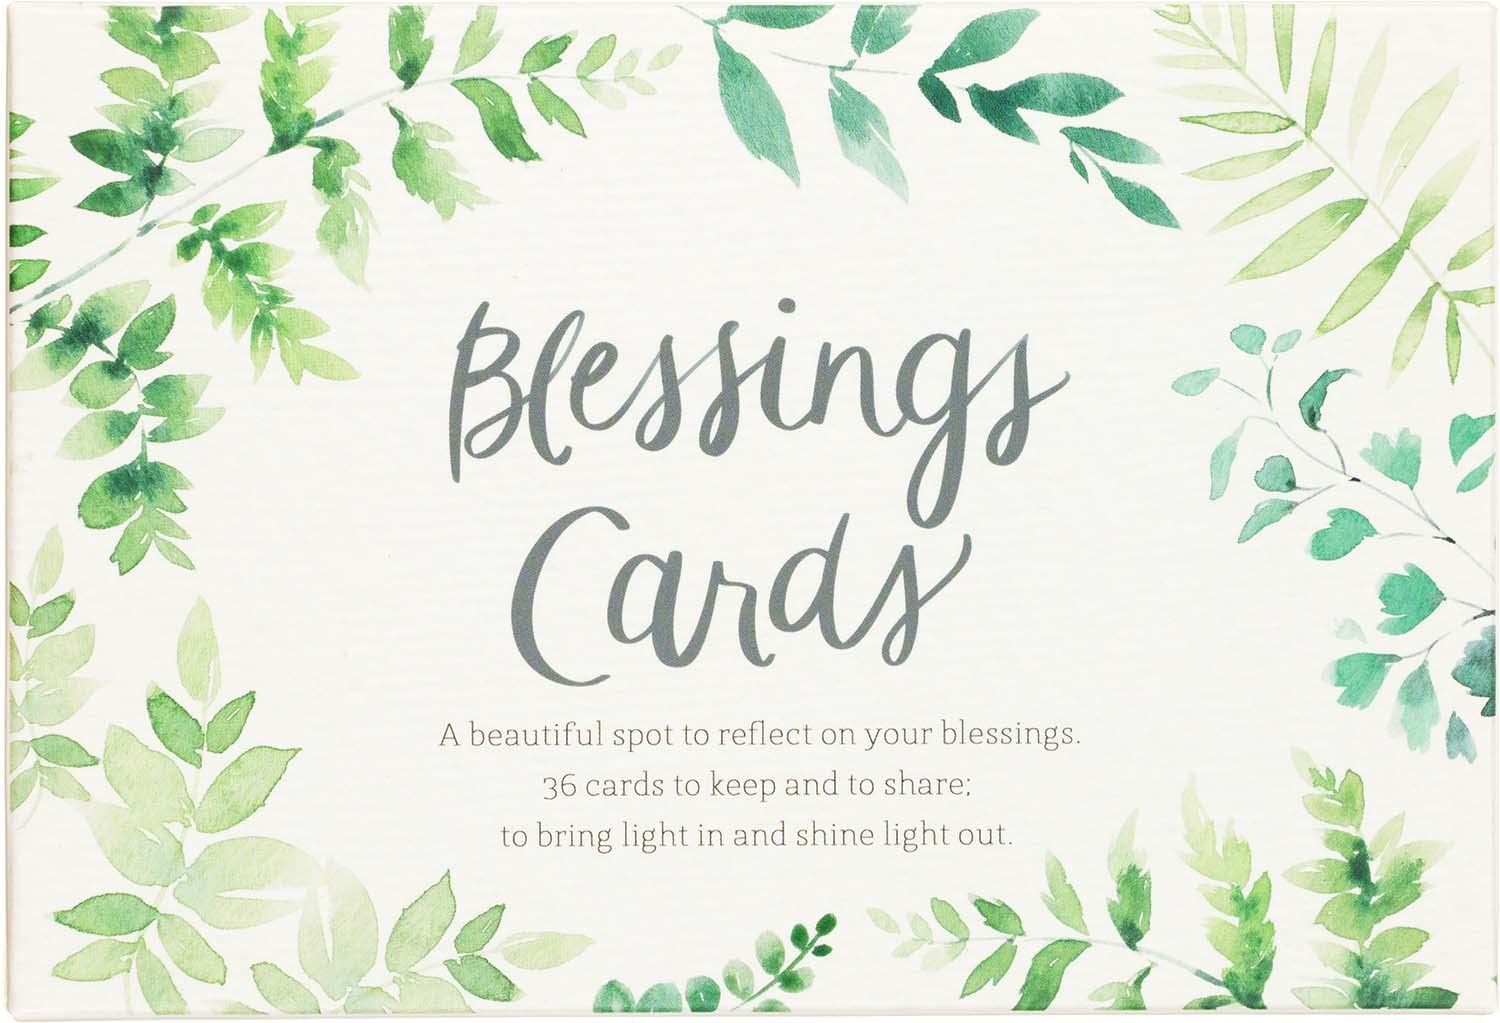 Eccolo Heatherlee Chan Blessings Cards